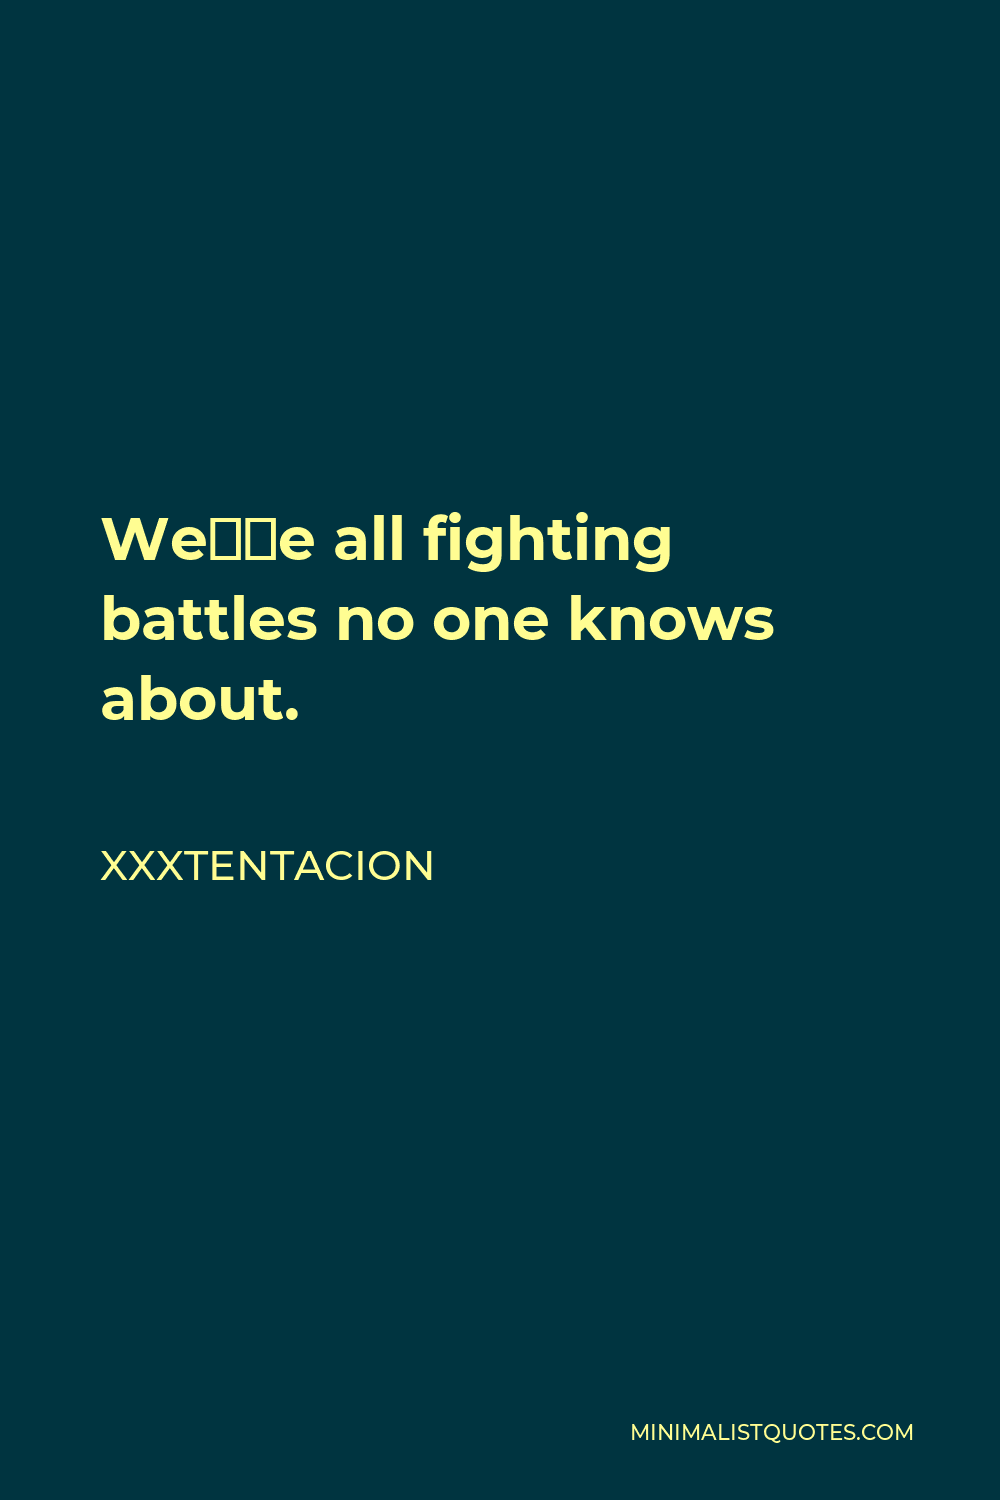 Xxxtentacion Quote - We’re all fighting battles no one knows about.